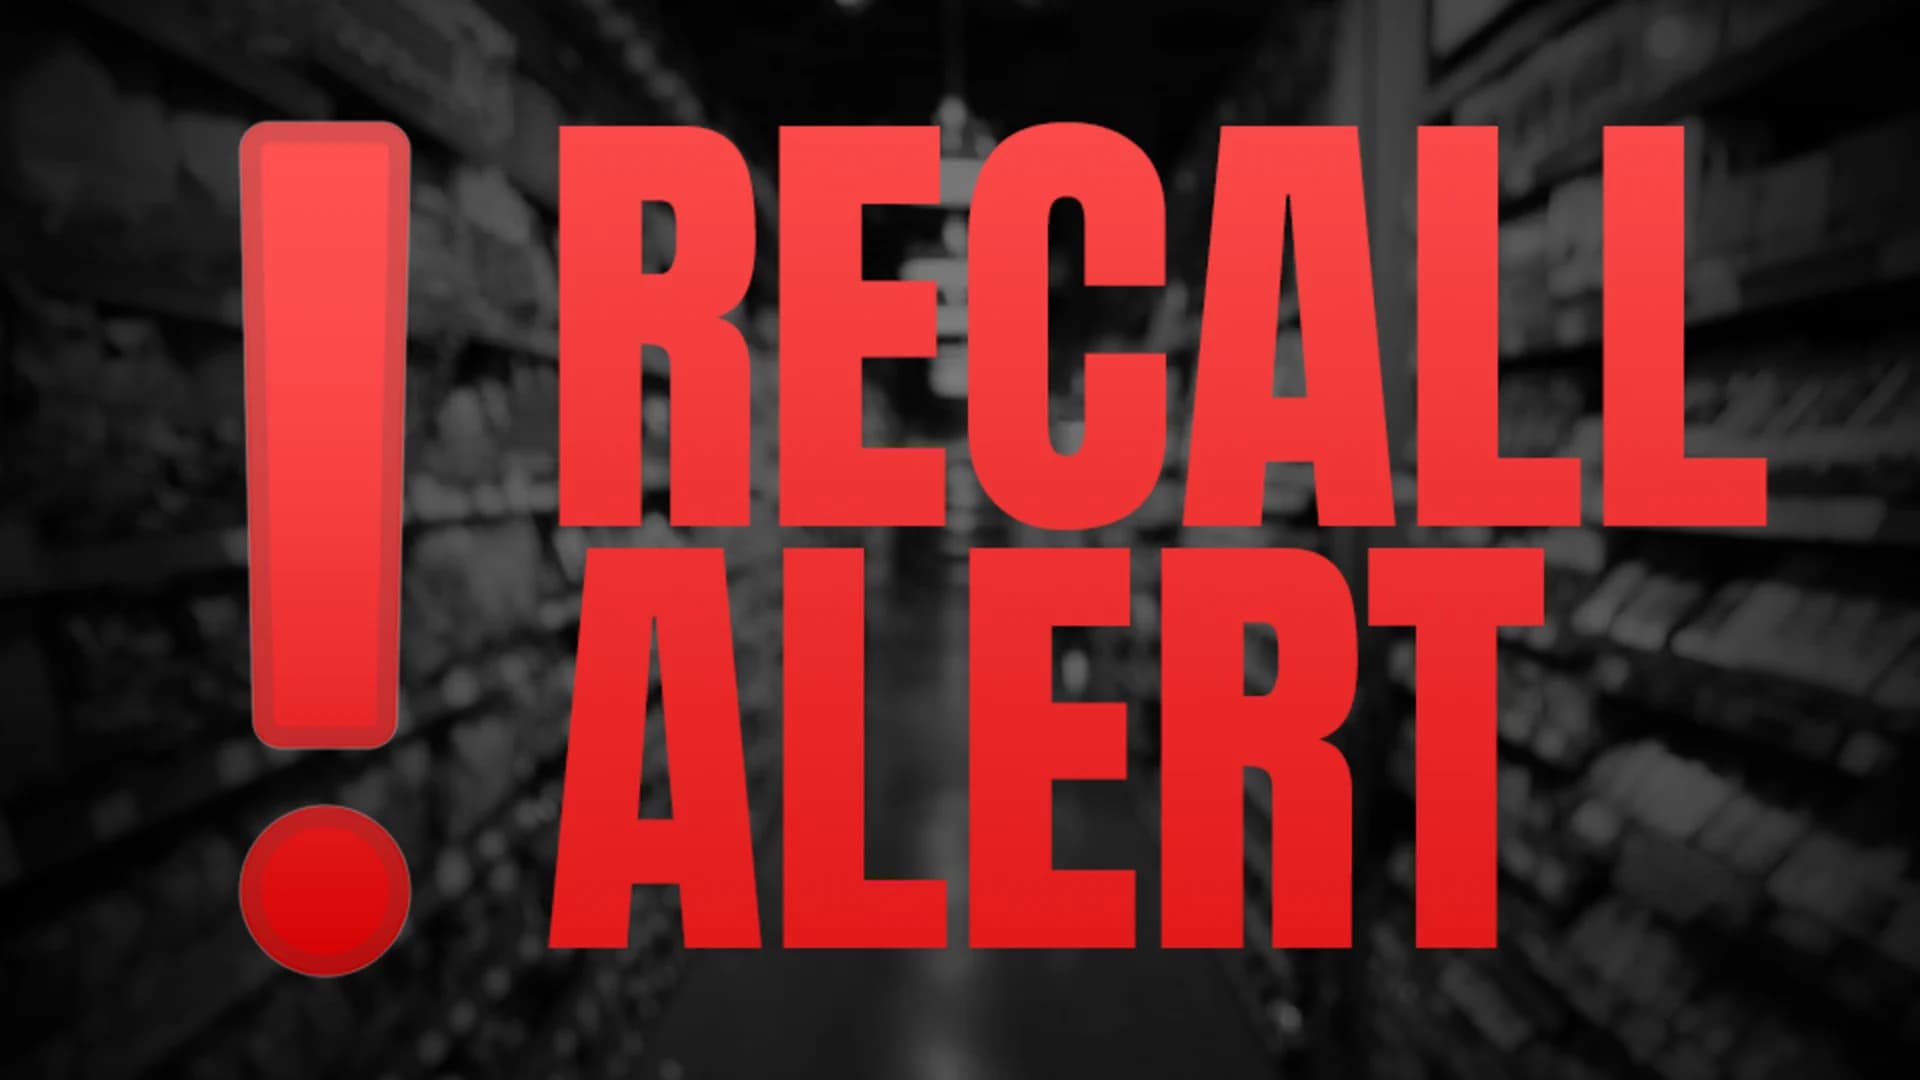 Nearly 200K pounds of pork sausage recalled for possible contamination